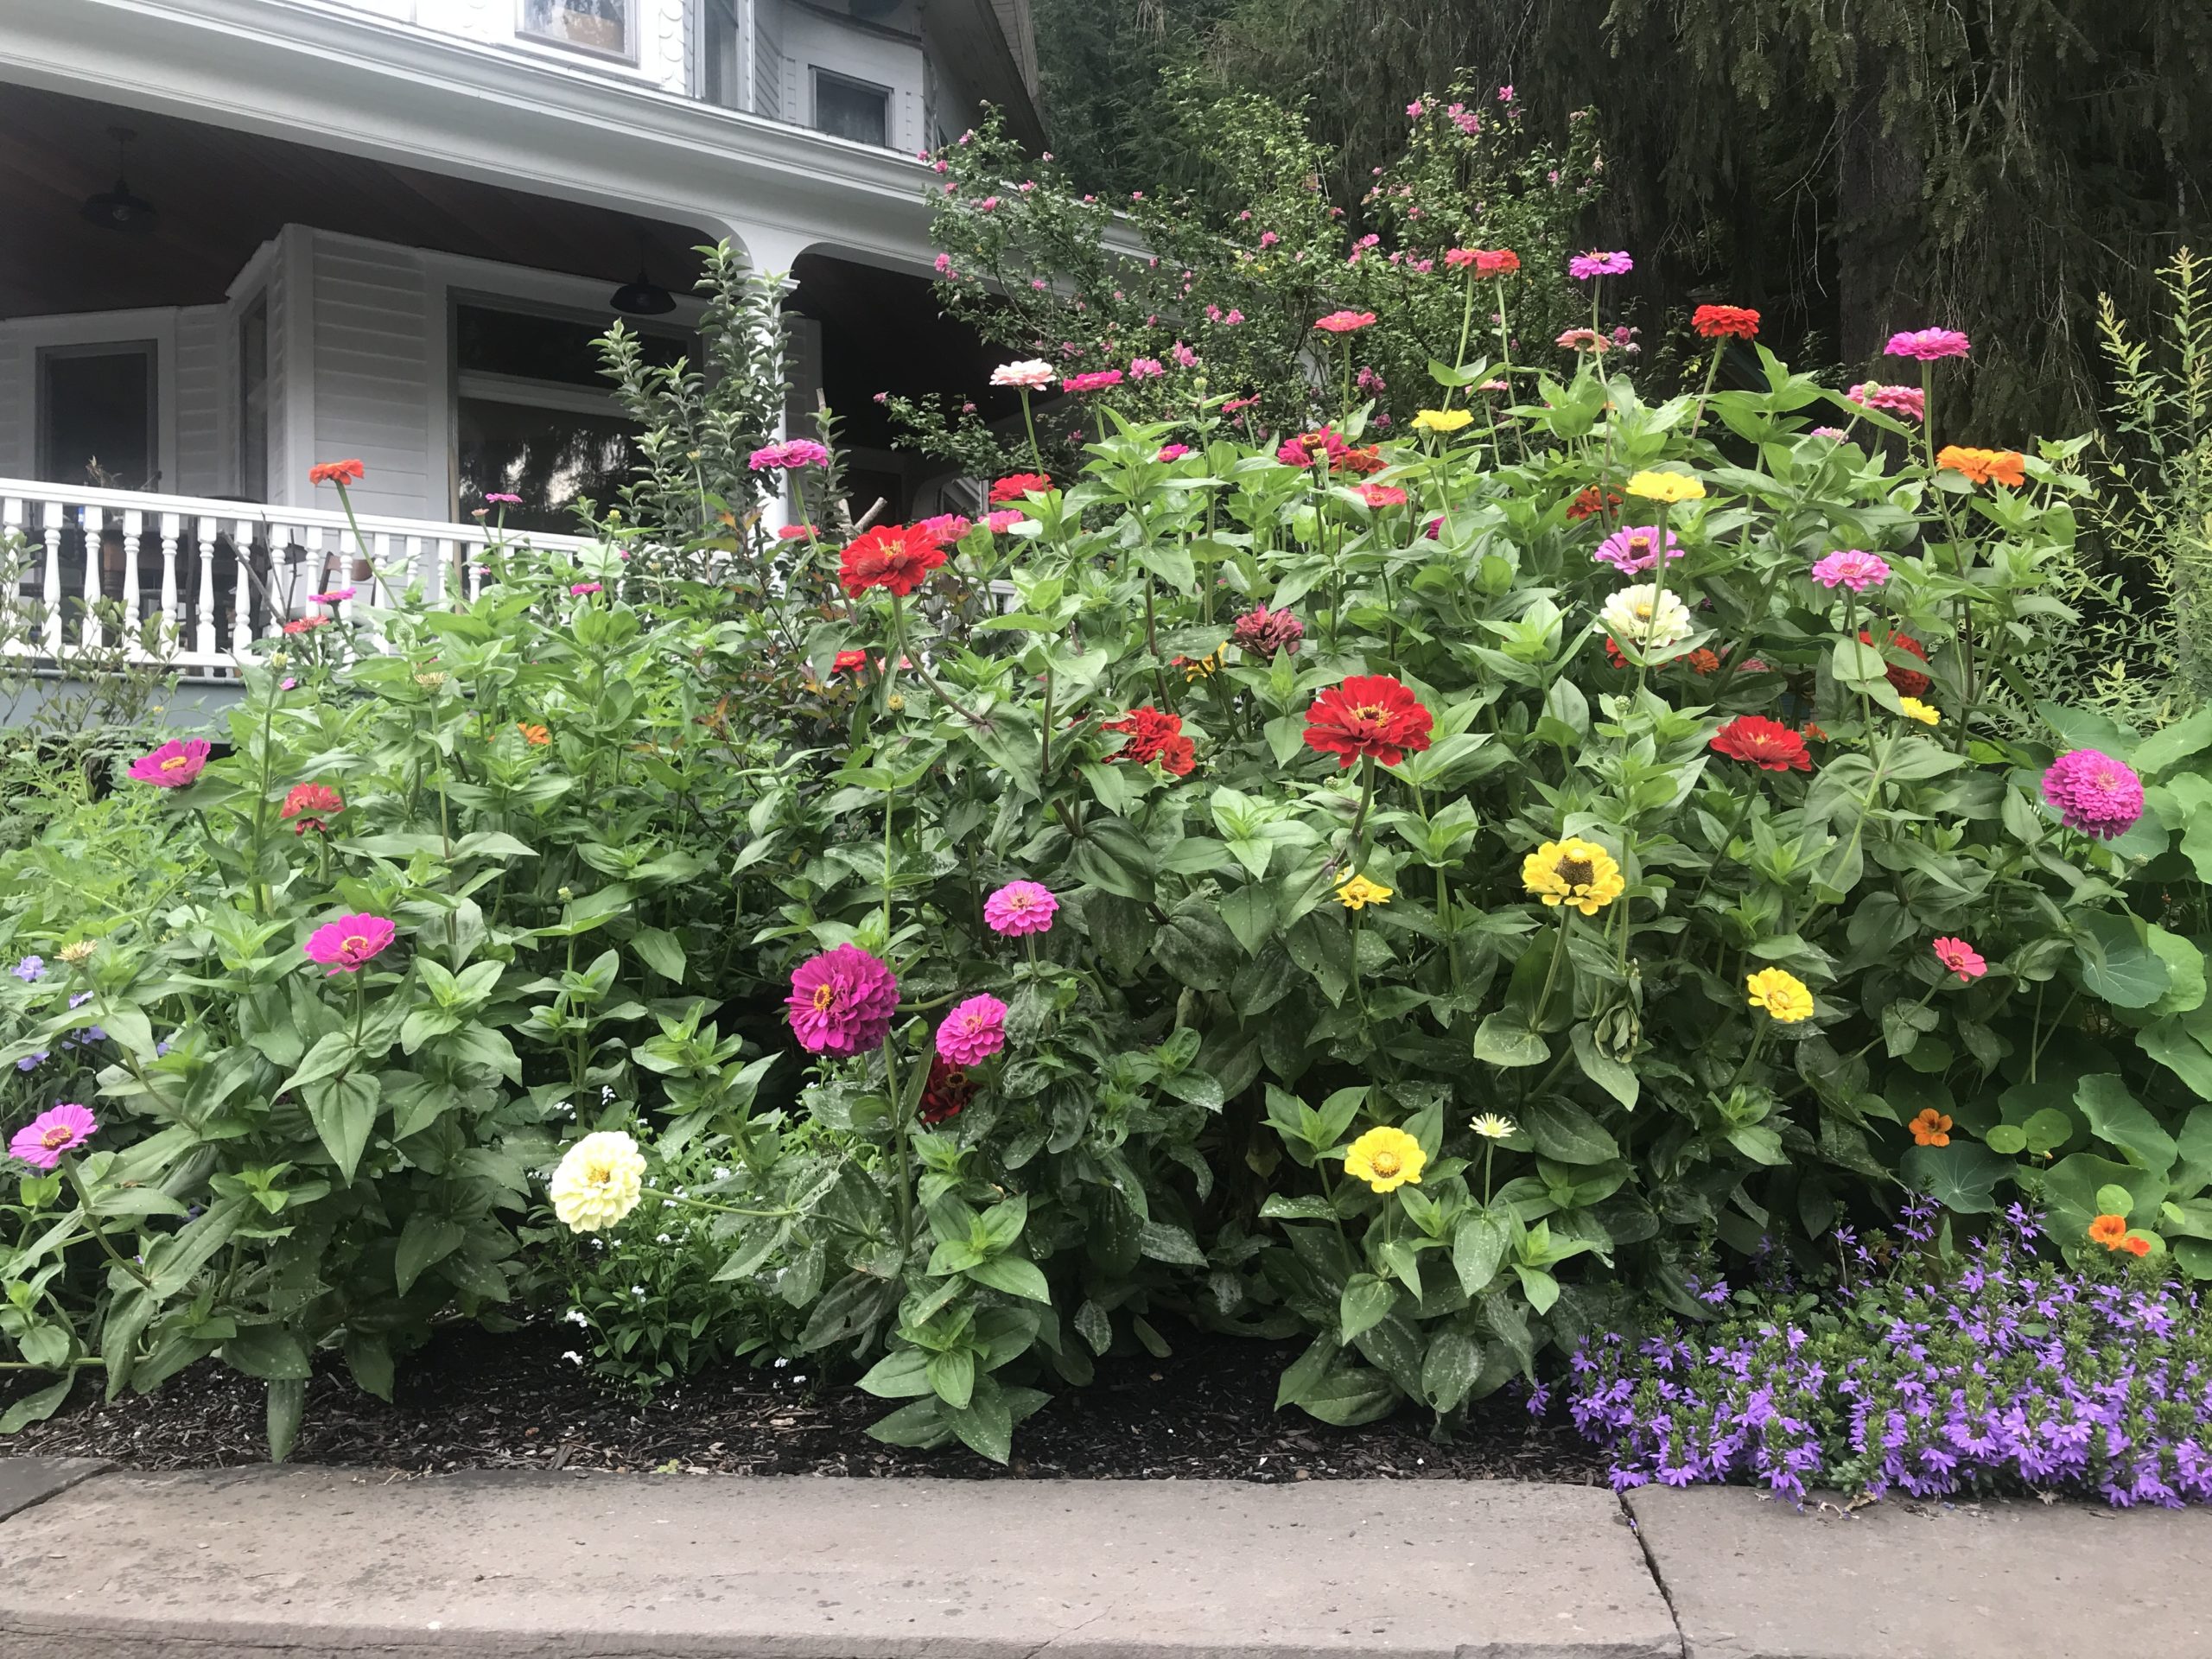 Zinnias are easily grown from seed, and the taller varieties make great cuts with strong stems.  Rows of mixed colors are easily grown in the cutting garden or in mass plantings like this display. A half-dozen stems cut every few days will never be missed.